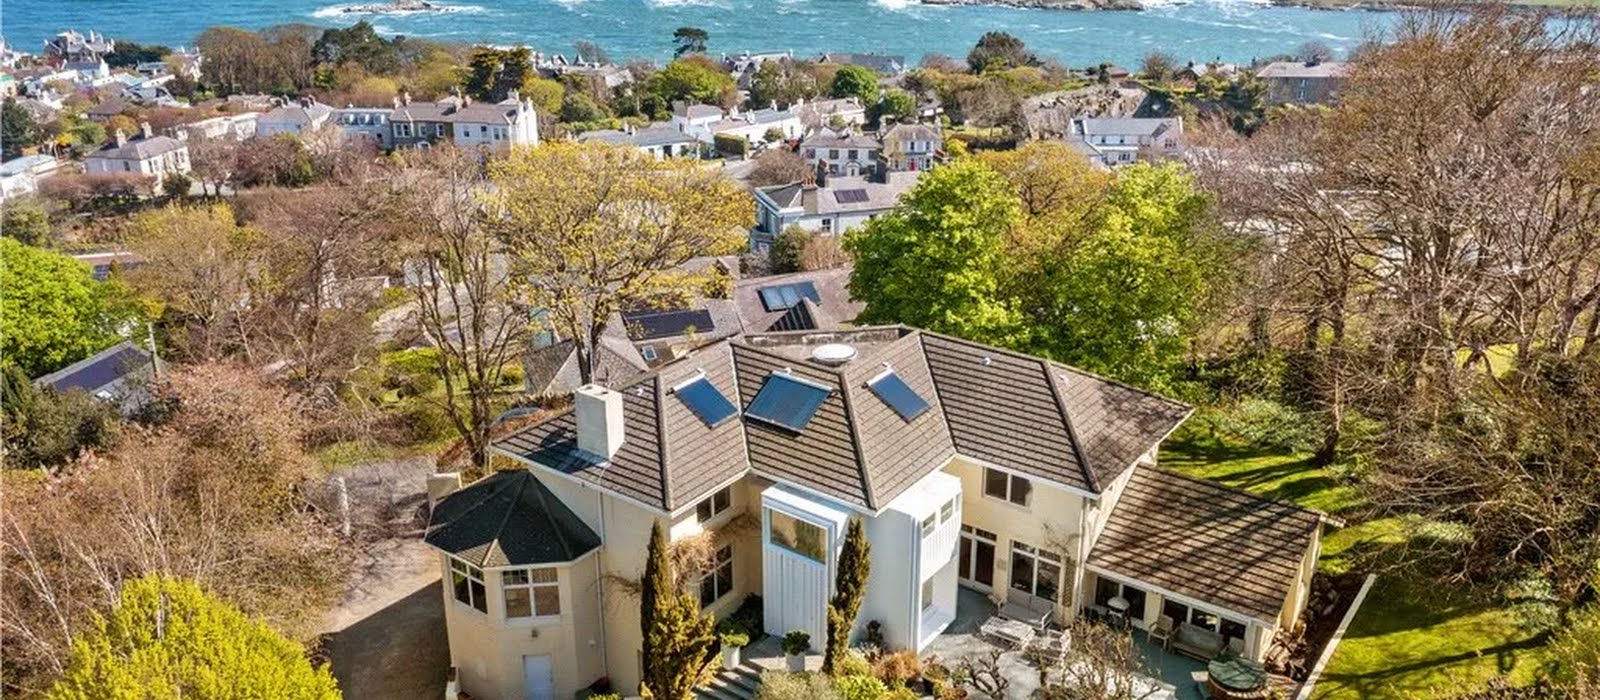 This exceptional family home with stunning views over Dublin Bay is on the market for €4.75 million